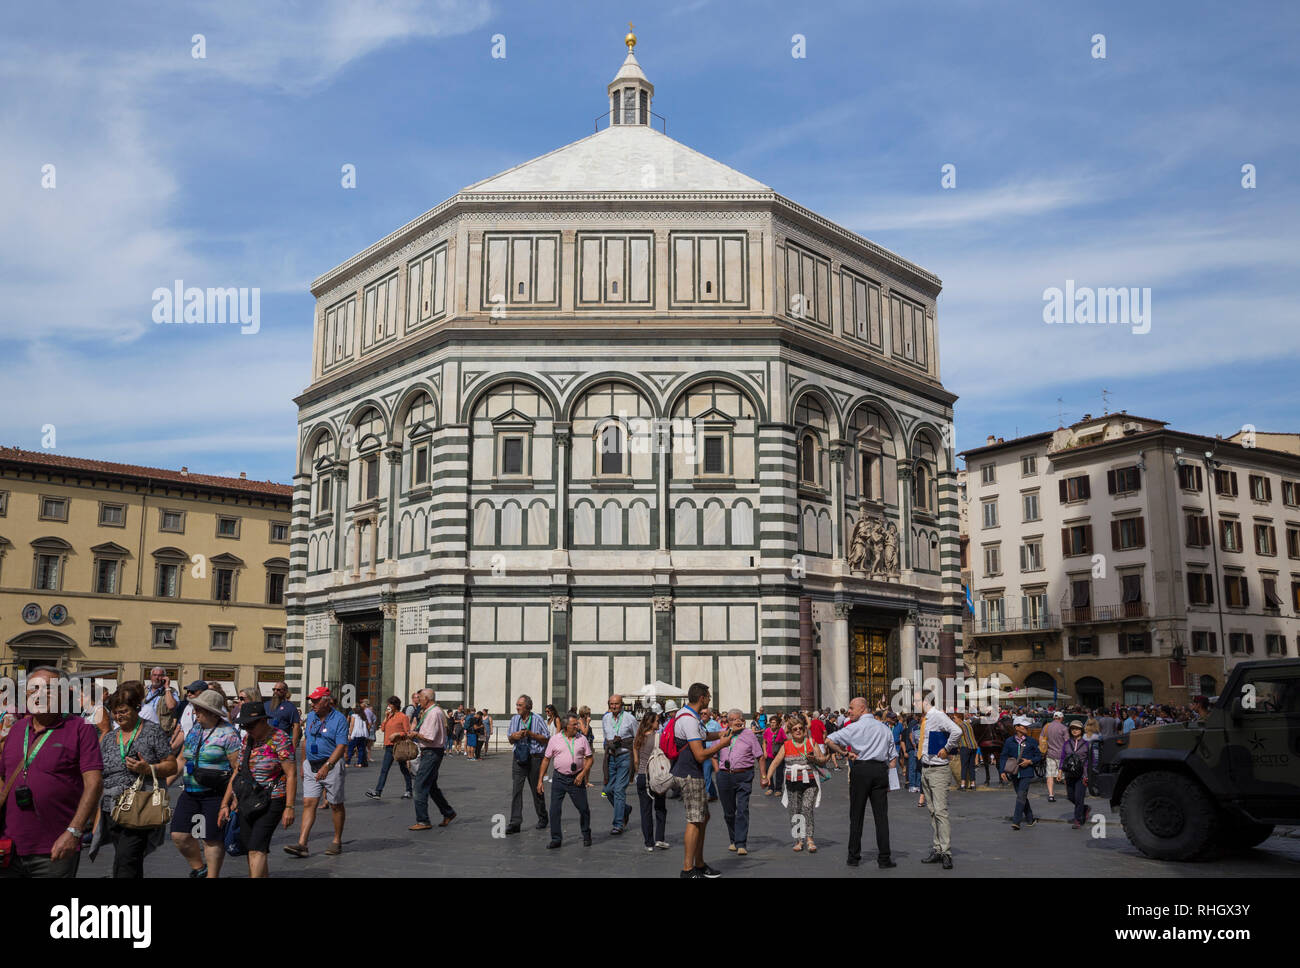 The Florence Baptistery, also known as the Baptistery of Saint John, Florence, Italy Stock Photo